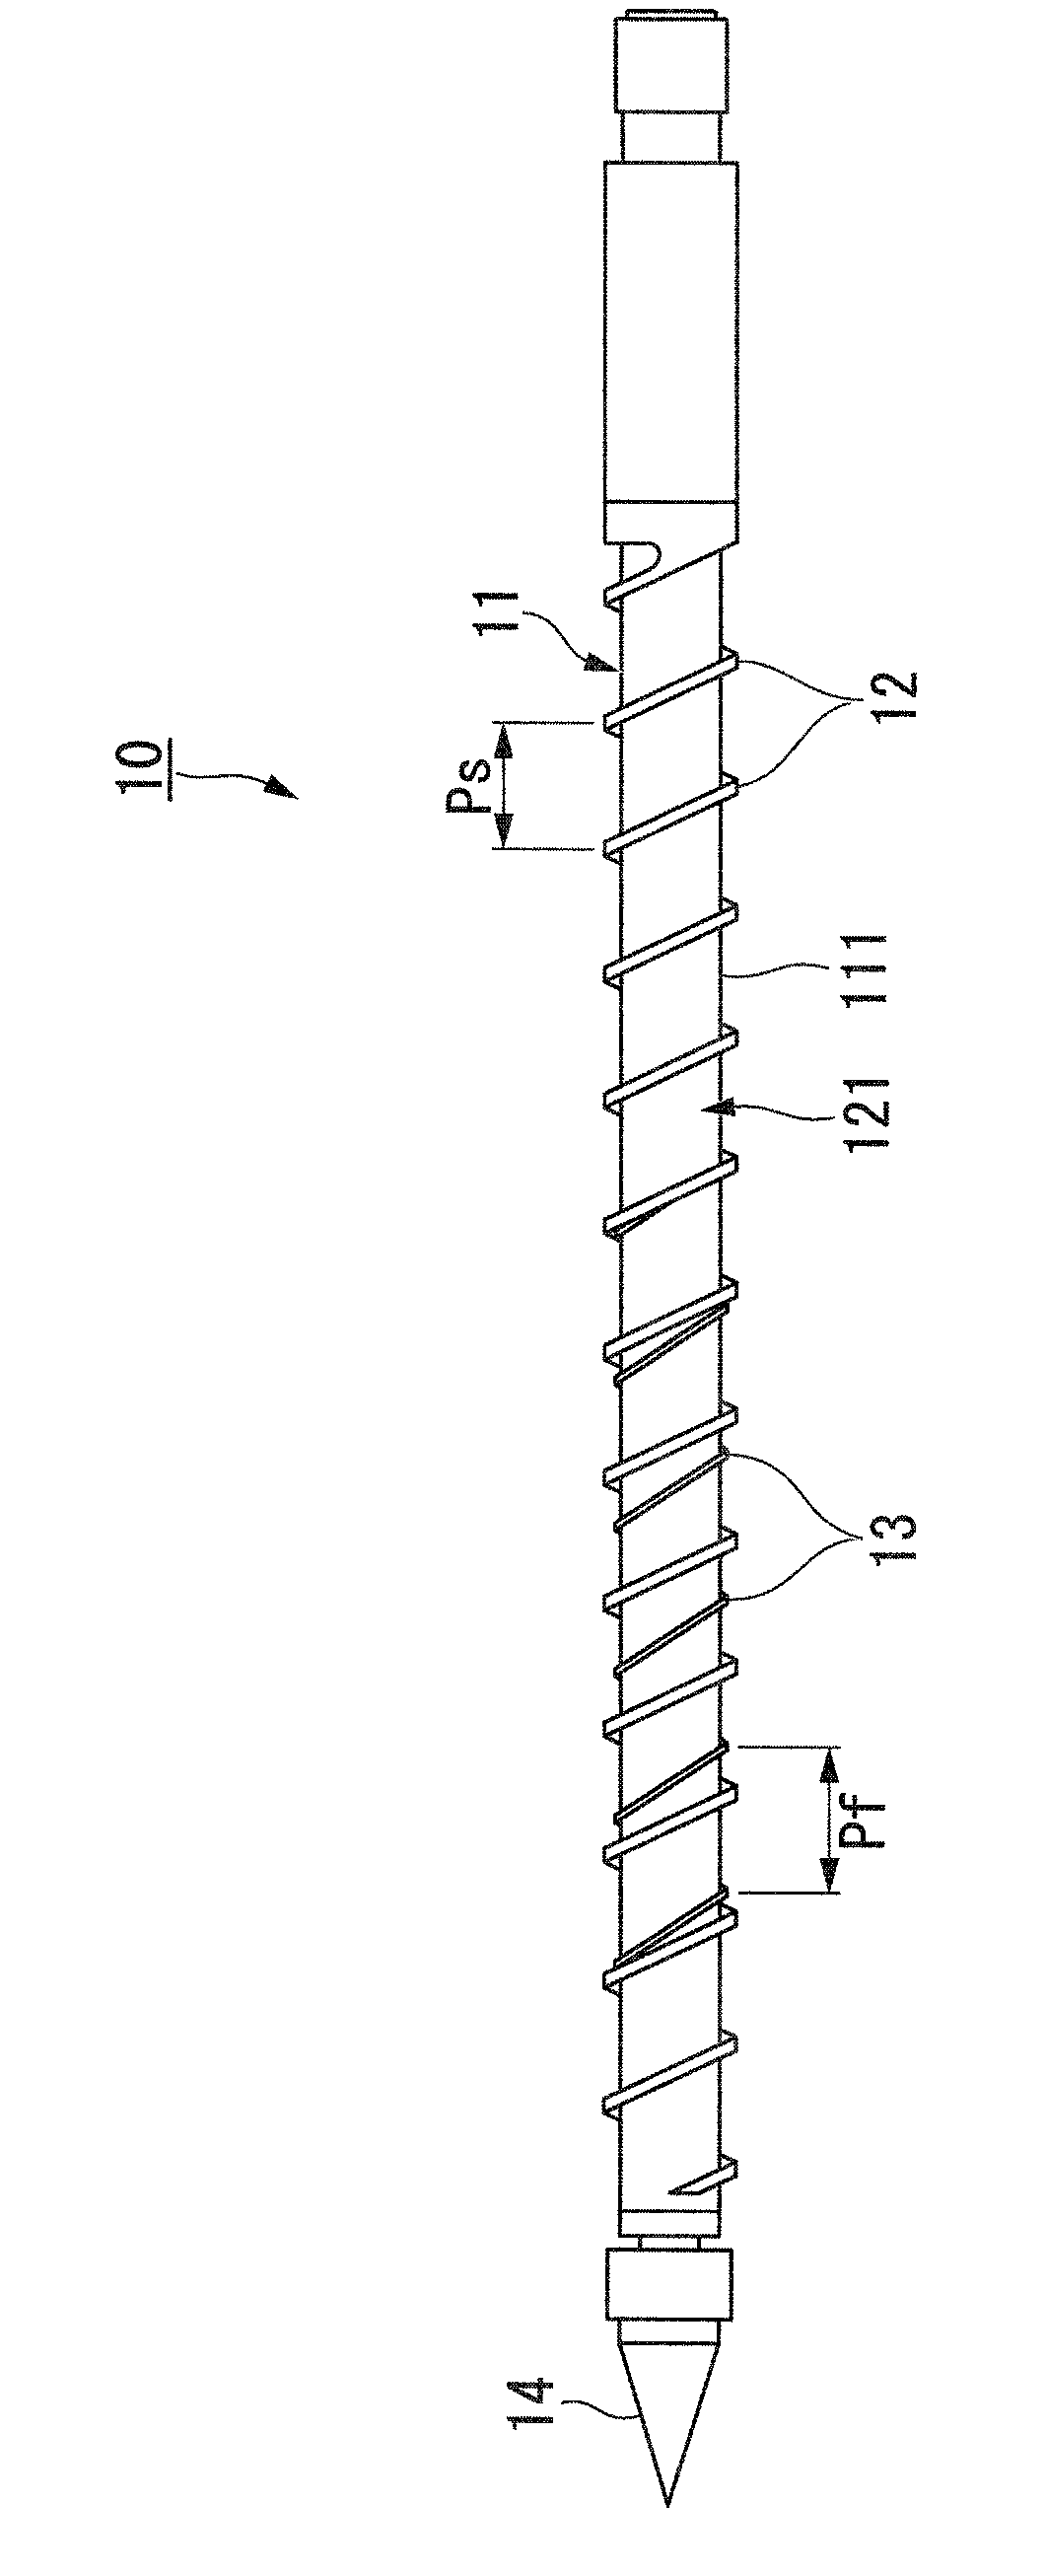 Plasticizing screw for injection molding and injection molding method using same